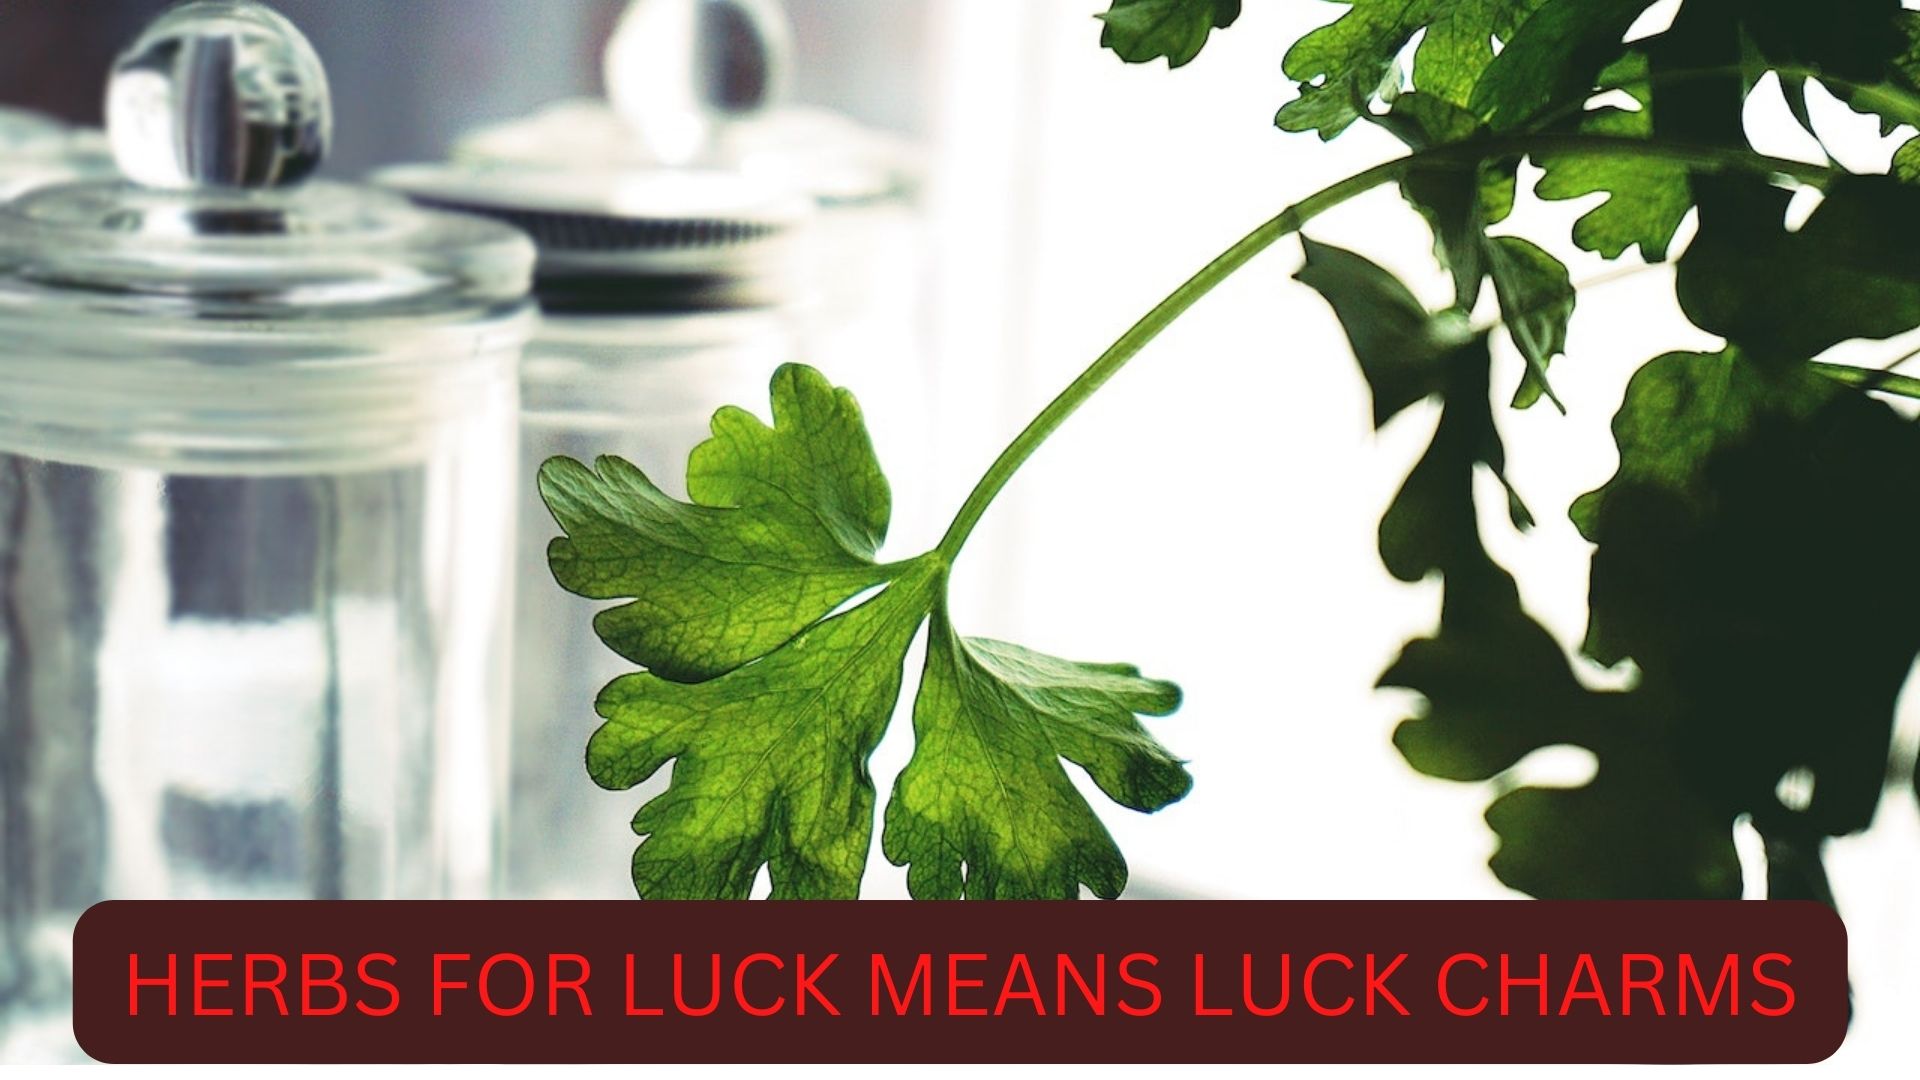 What Are The Herbs For Luck And Success?